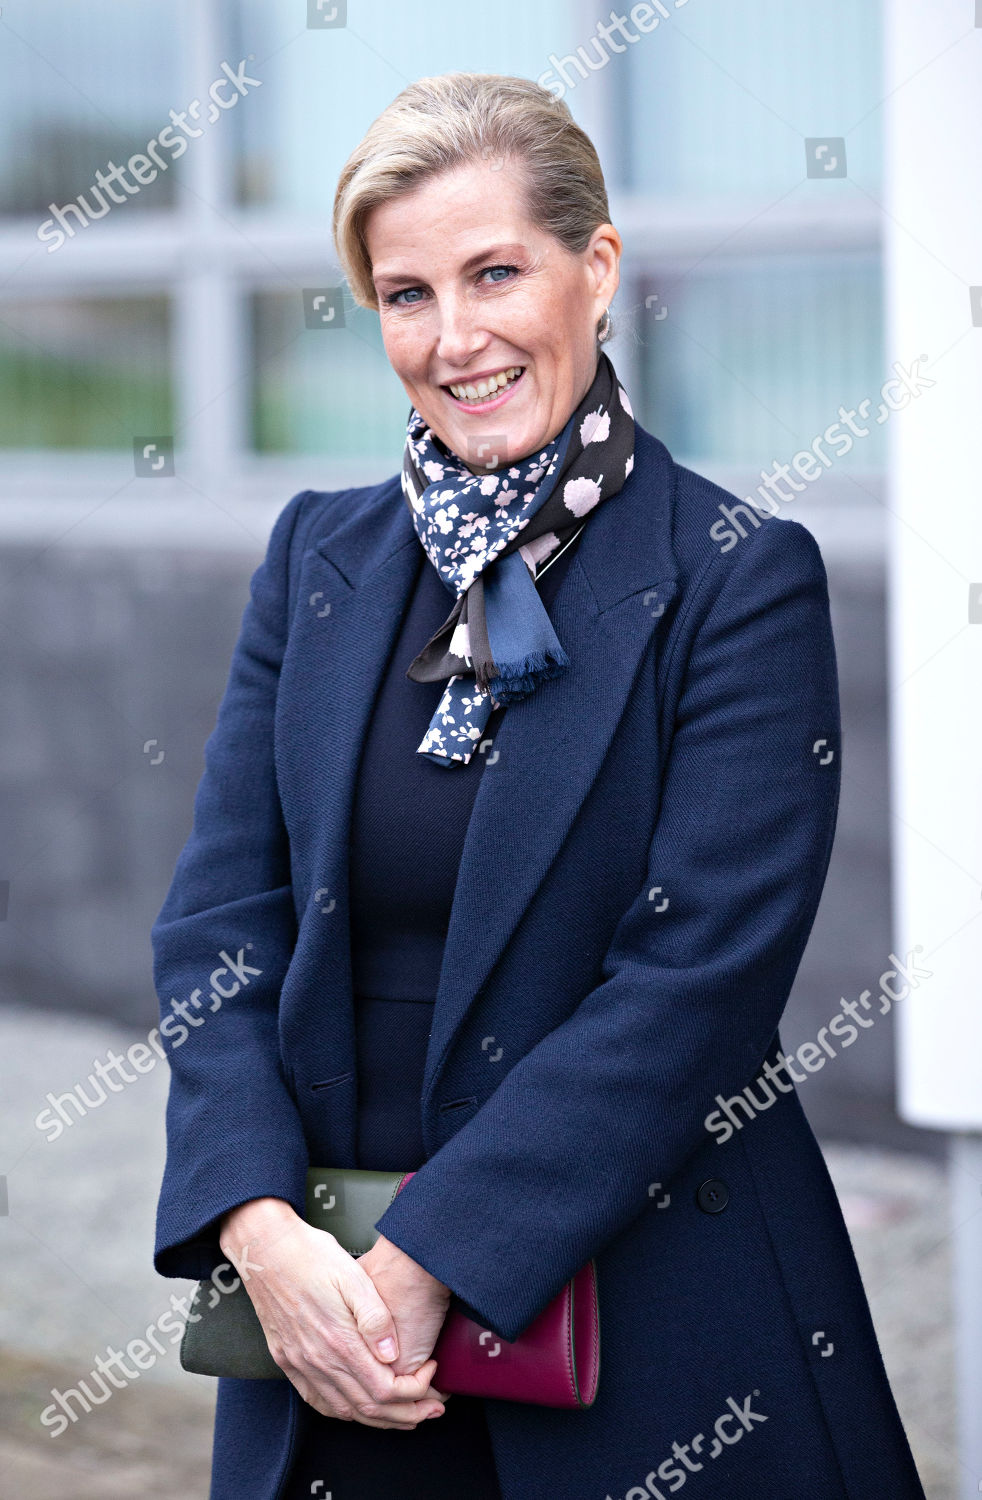 sophie-countess-of-wessex-visit-to-cornwall-uk-shutterstock-editorial-10013548am.jpg